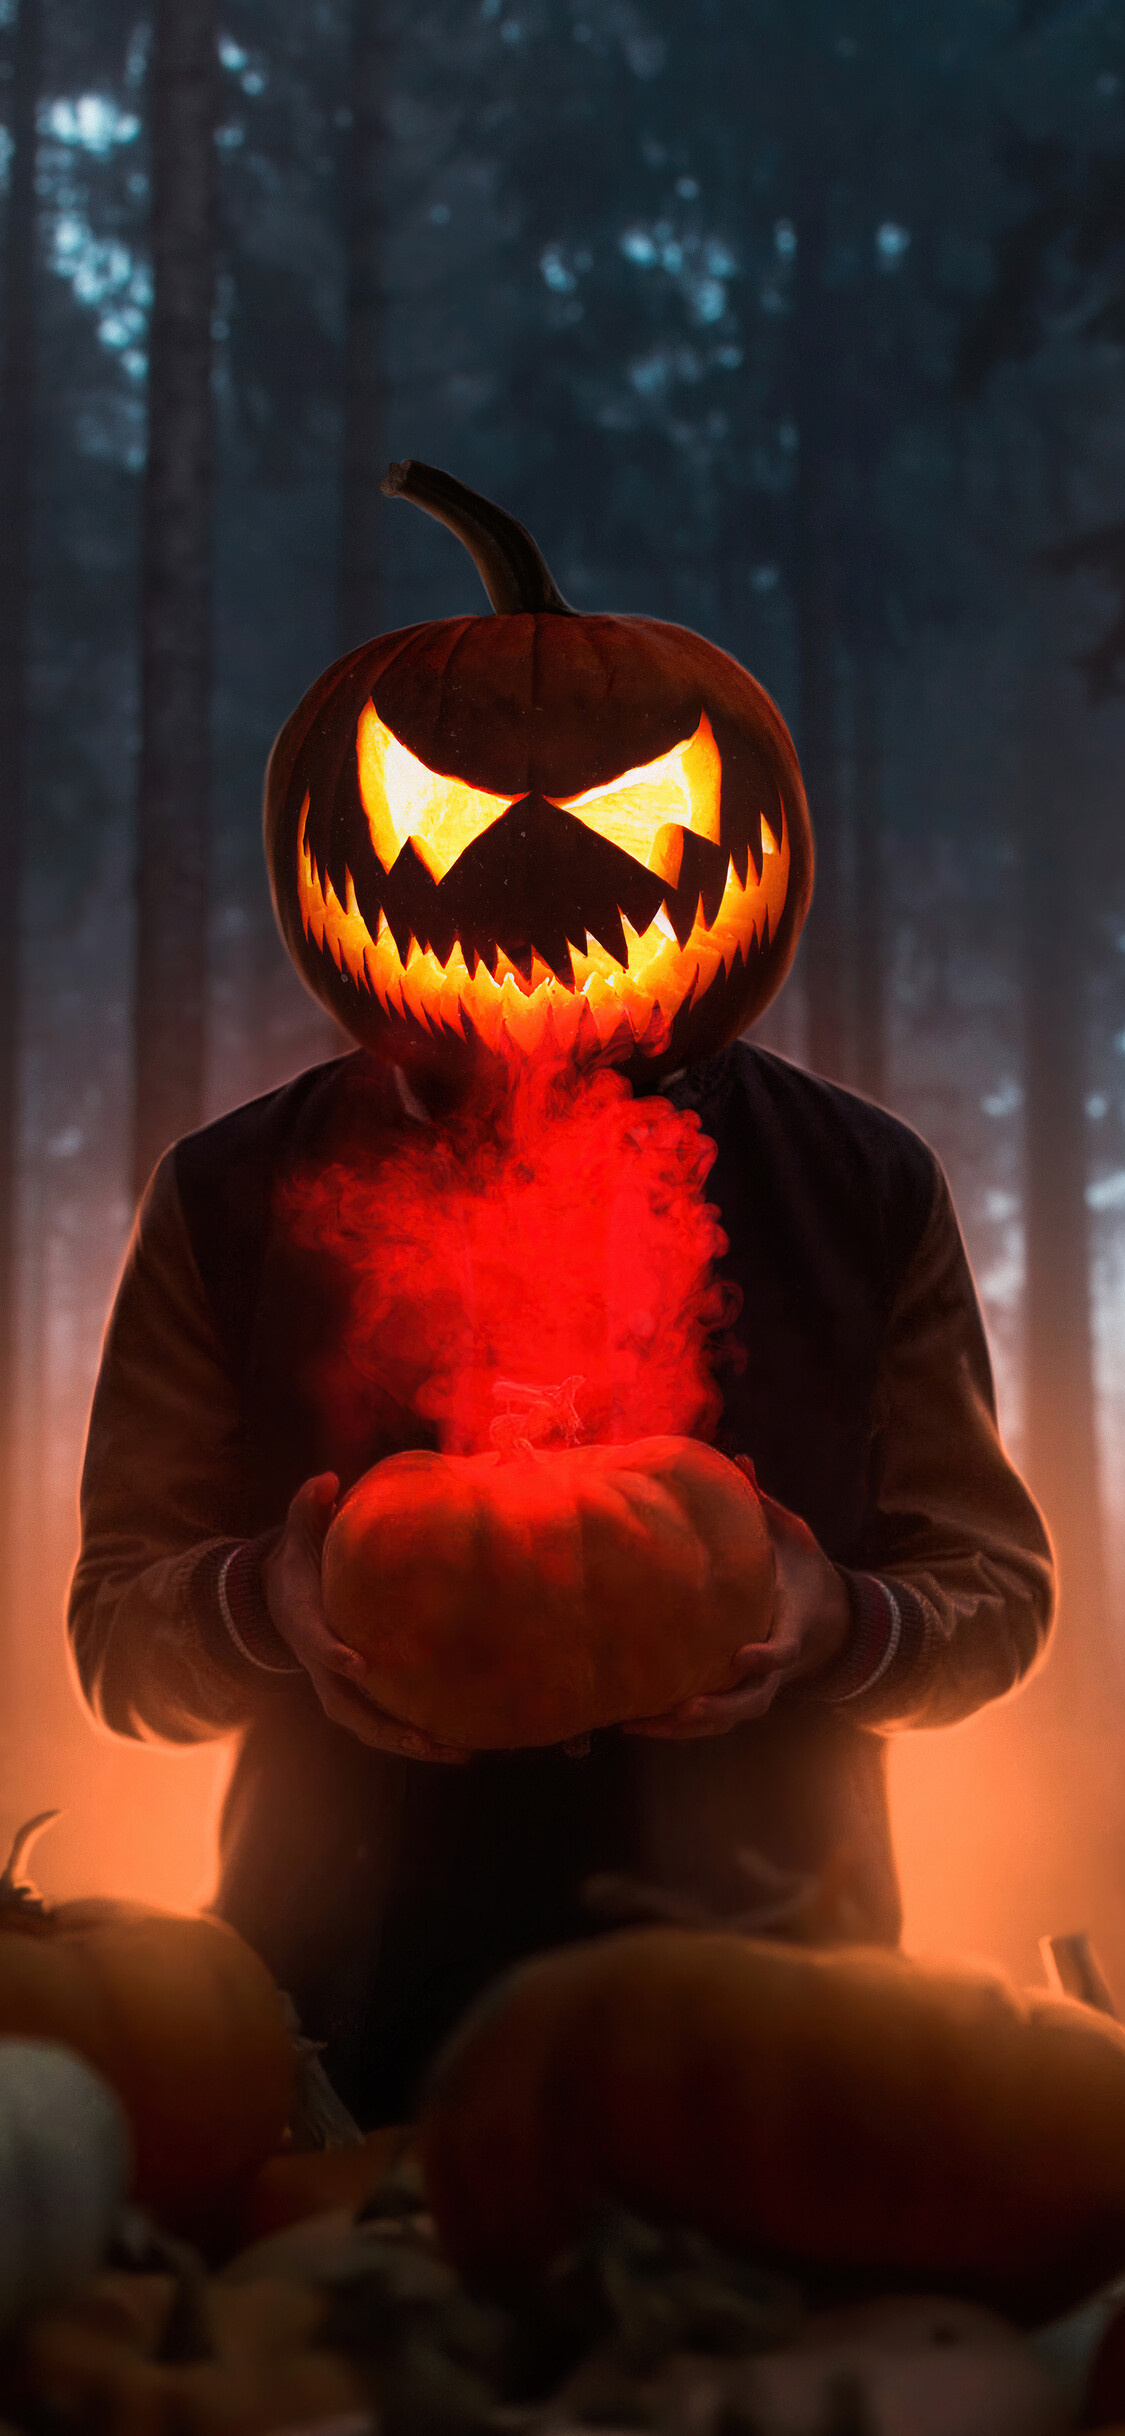 Halloween: The time when ghosts and witches can be seen, Allhallows Eve. 1130x2440 HD Wallpaper.